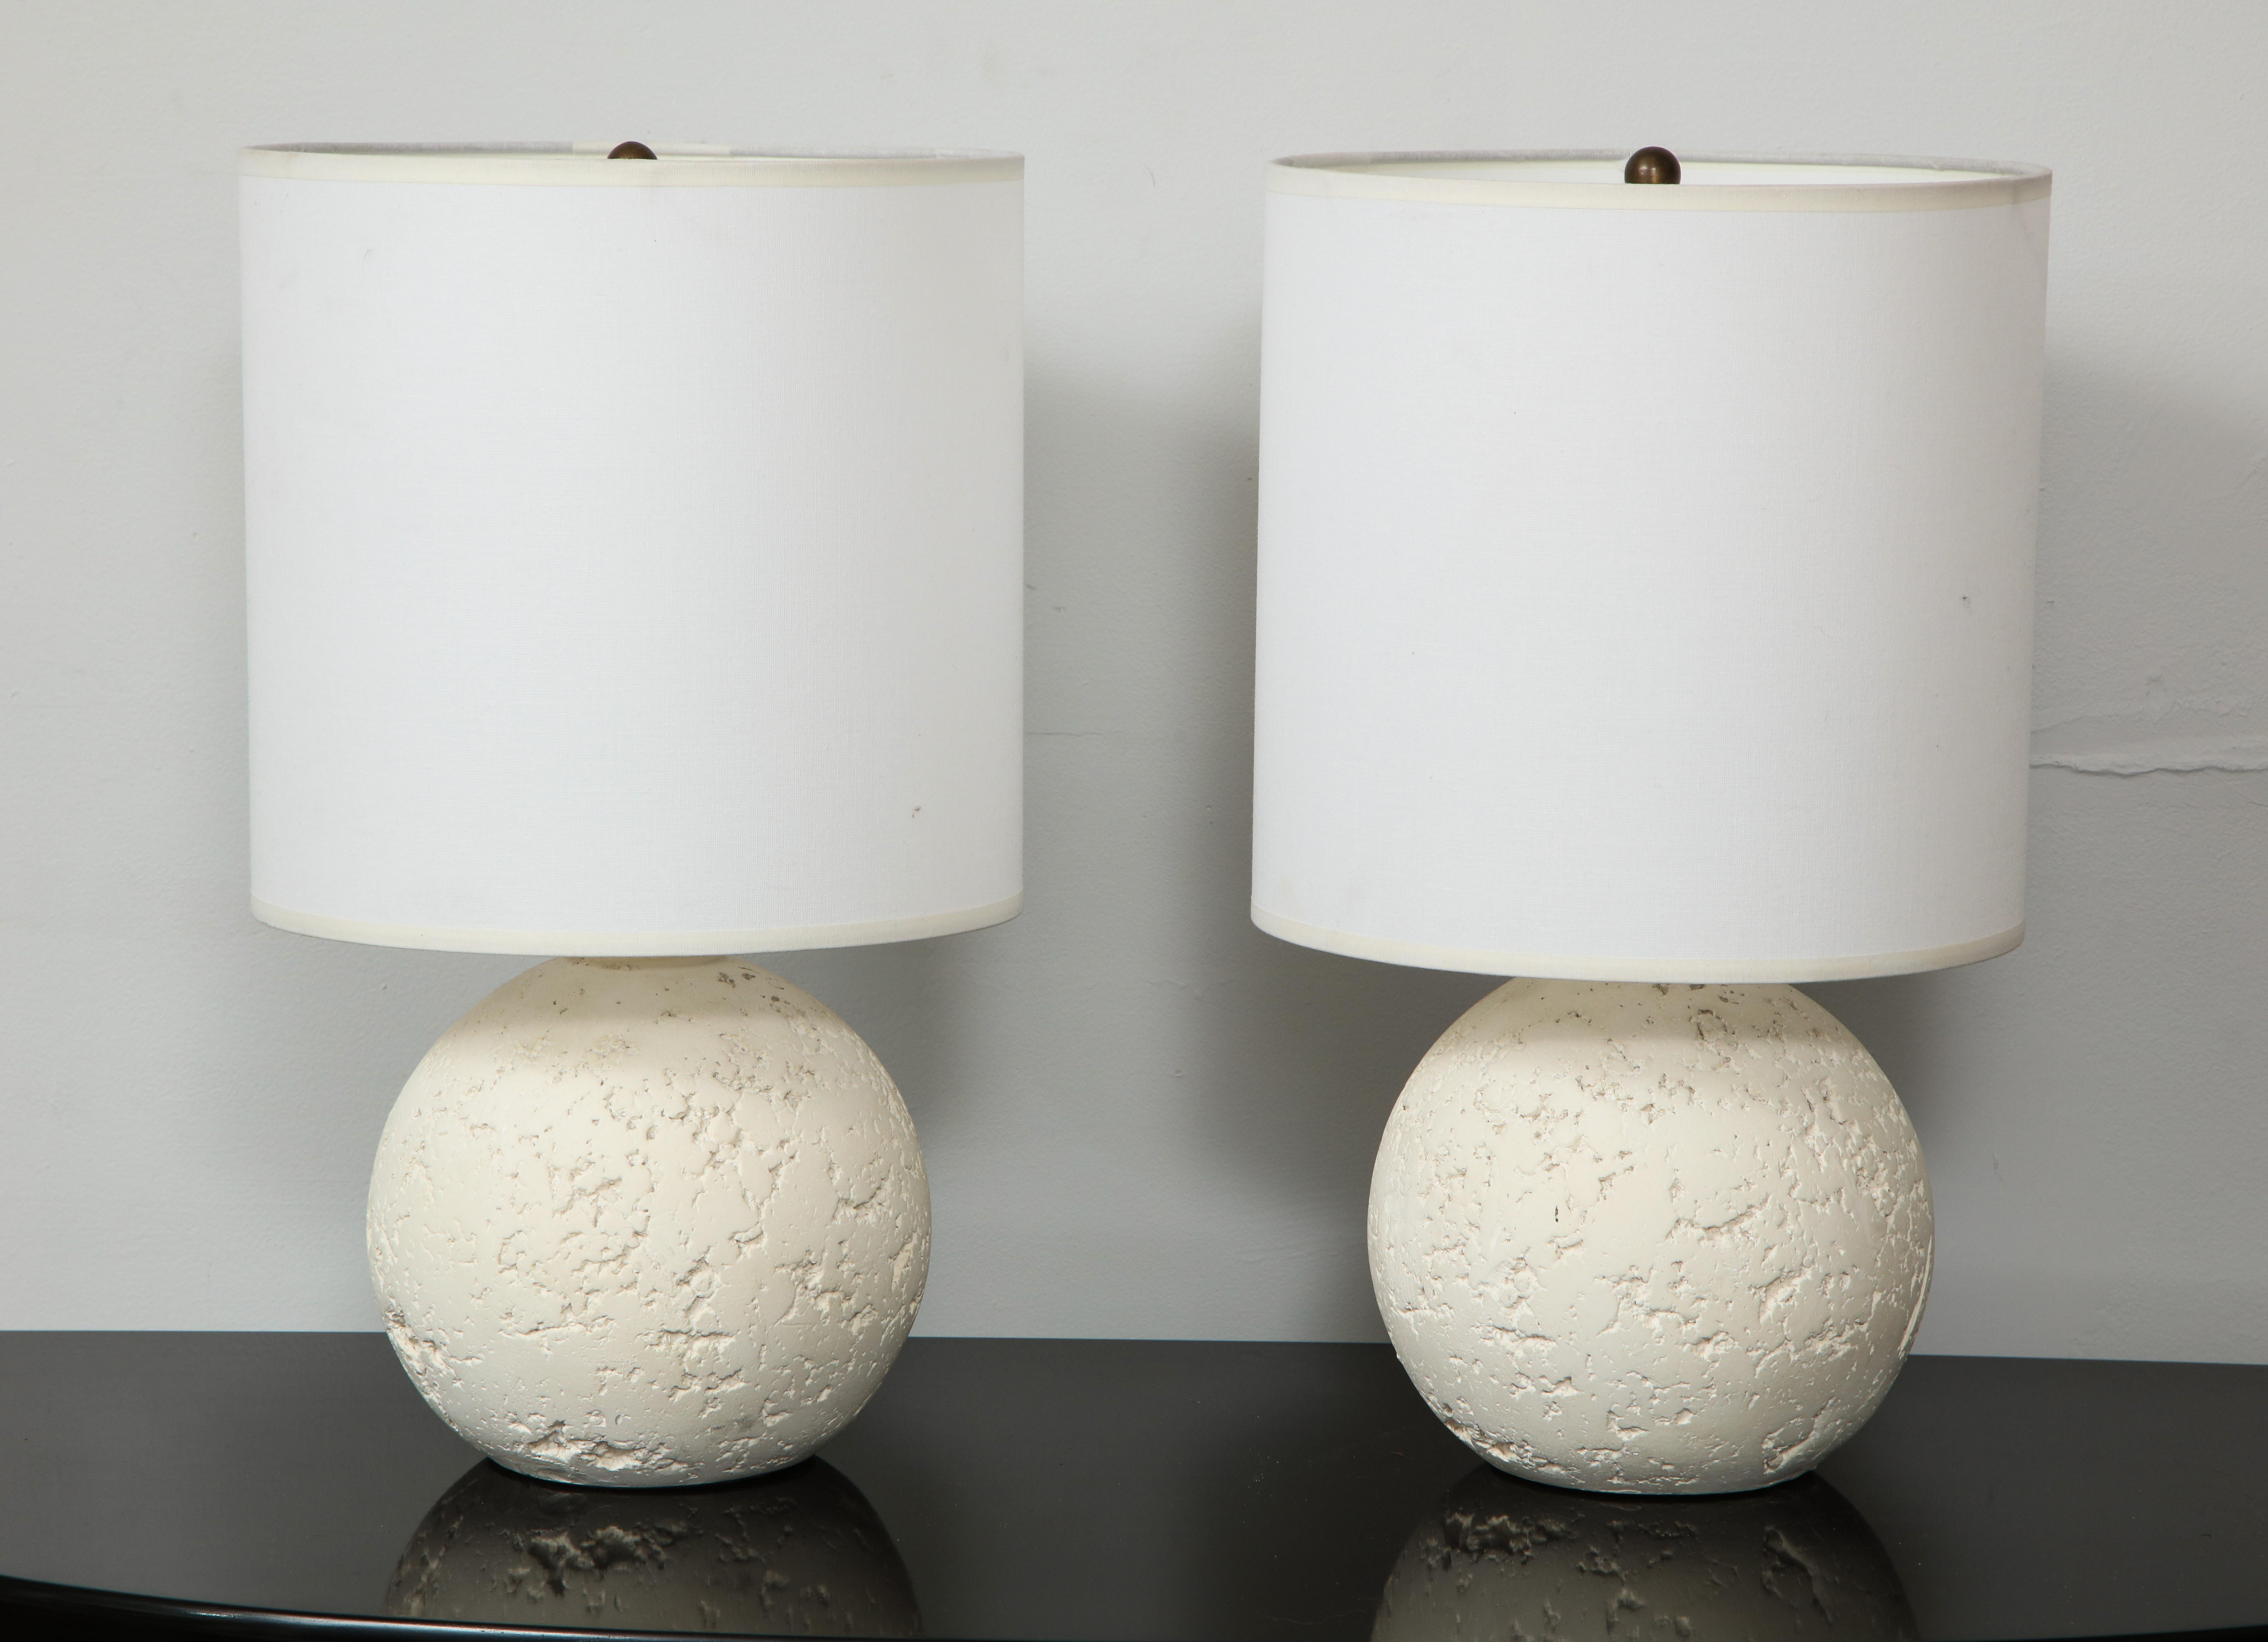 Custom pair of textured circular plaster lamps.
Lead Time for custom made is 8-10 weeks.